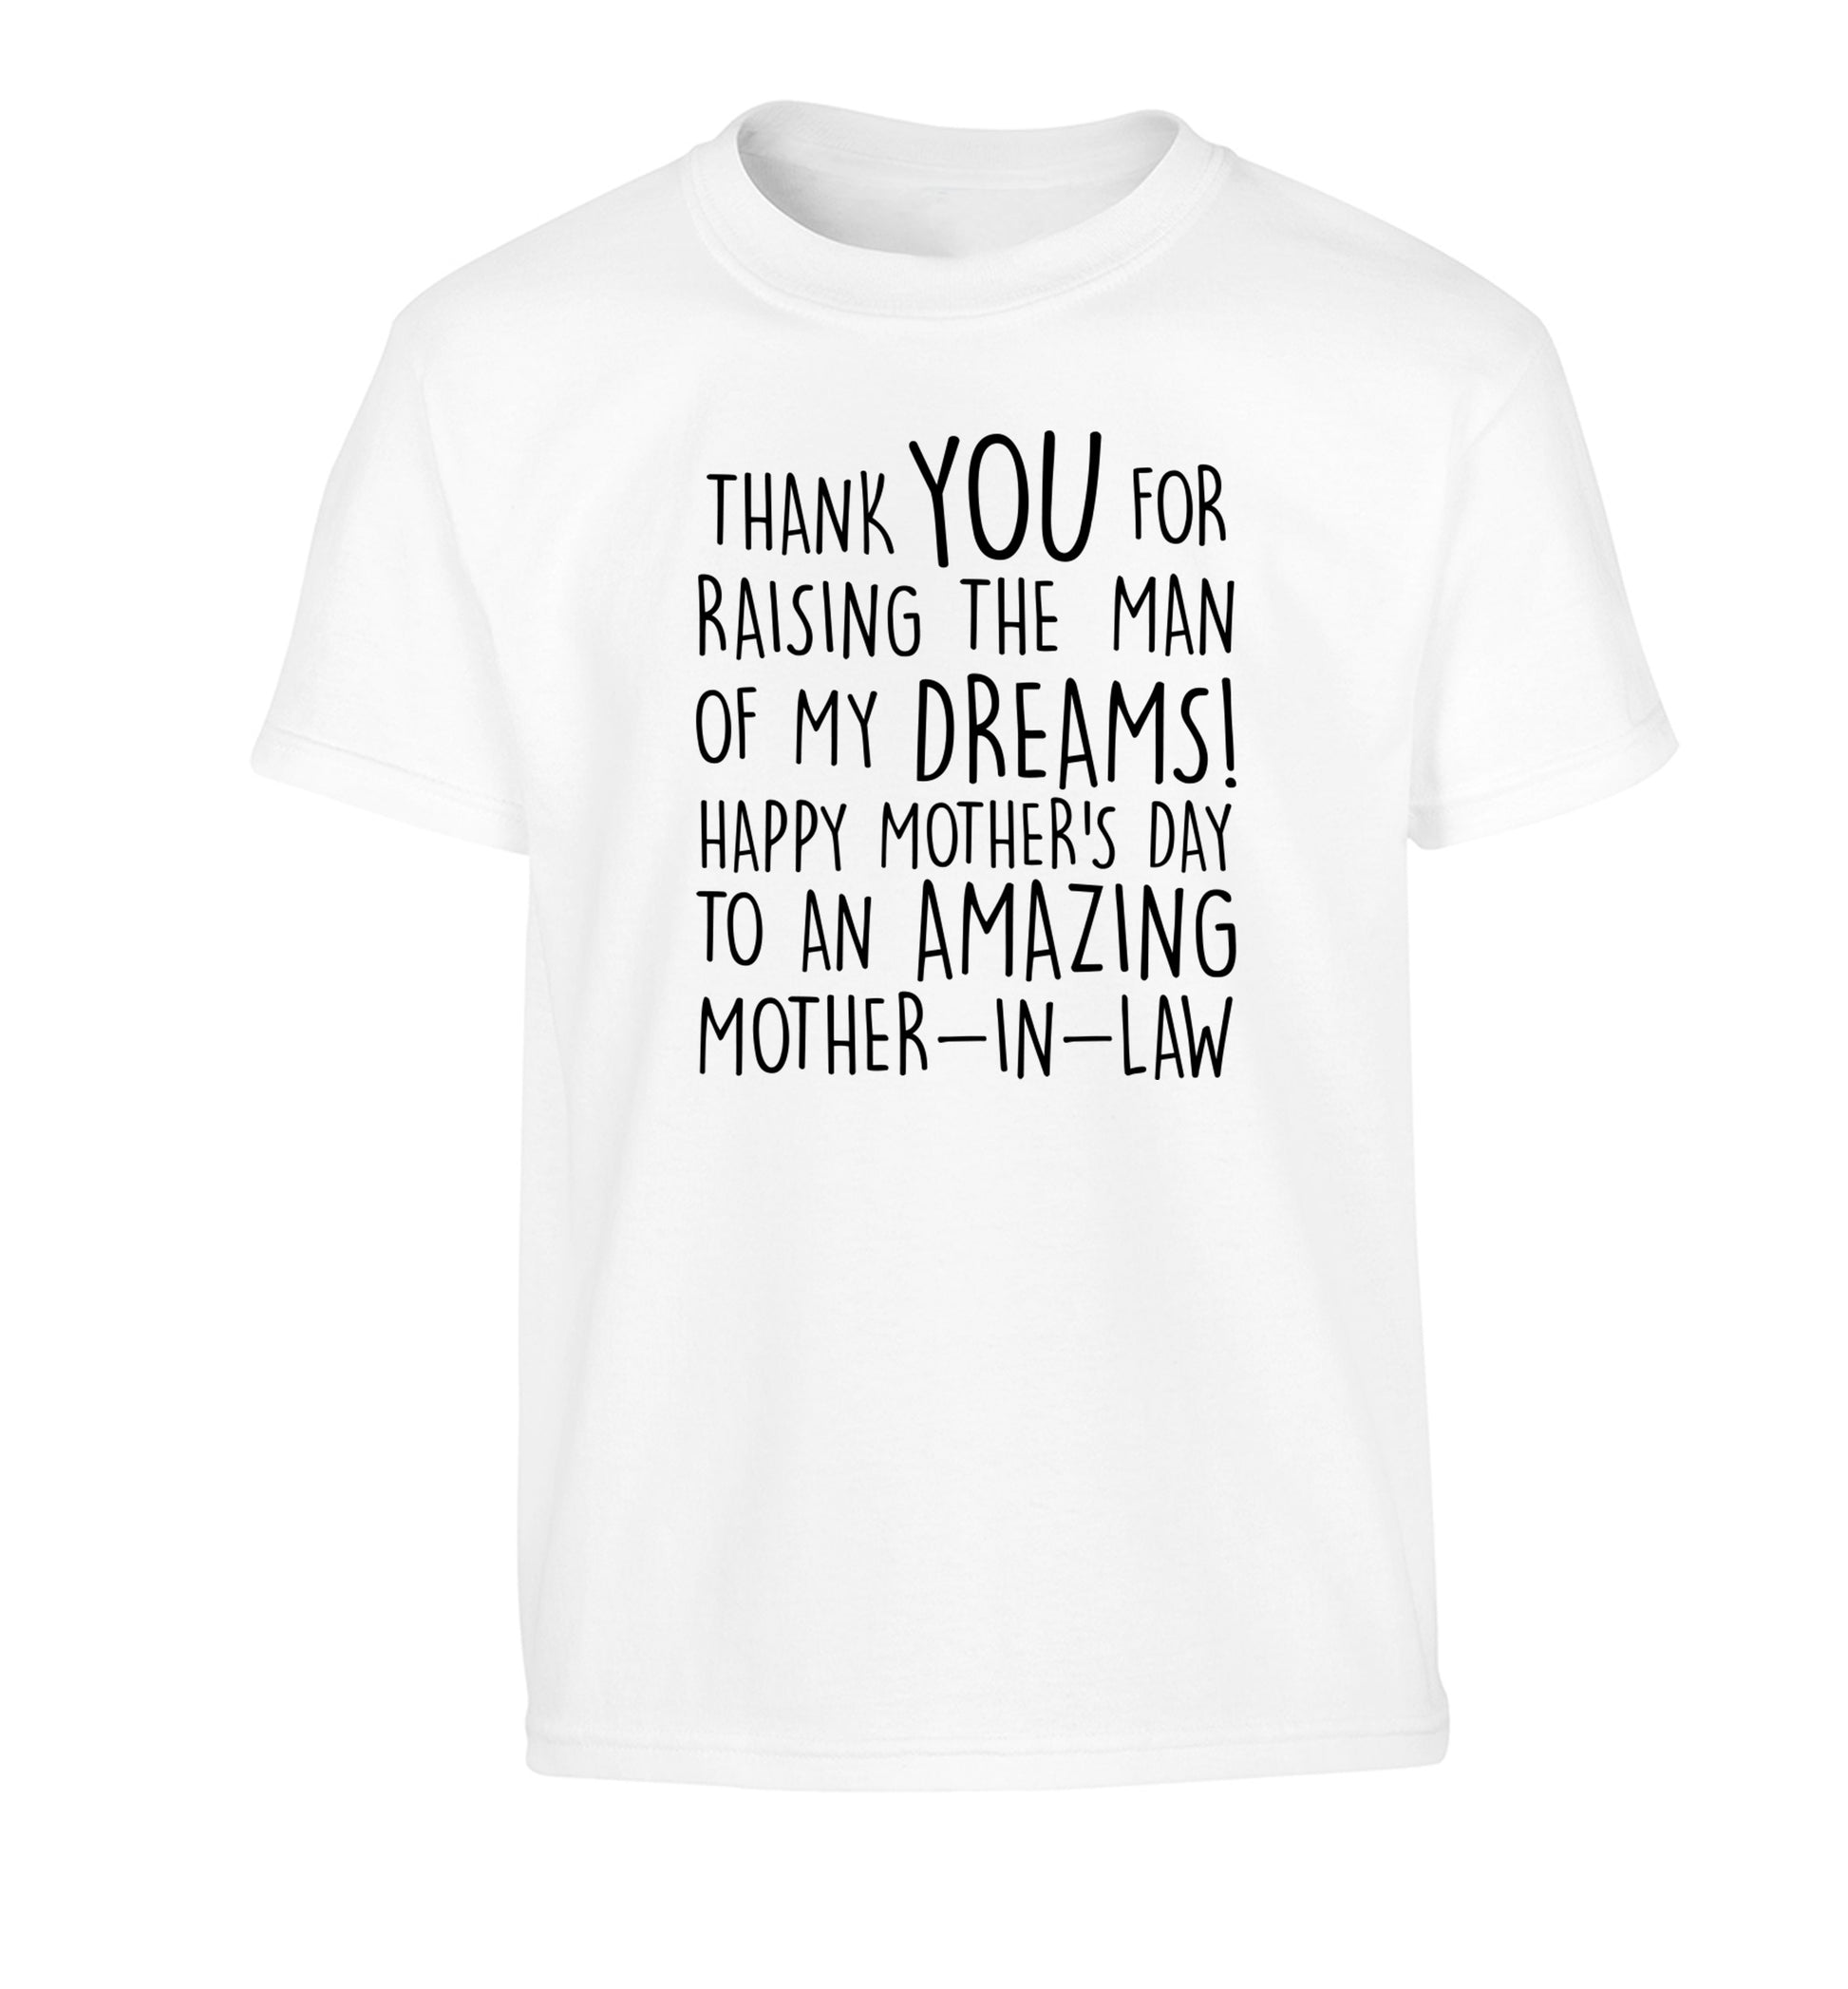 Thank you for raising the man of my dreams happy mother's day mother-in-law Children's white Tshirt 12-13 Years